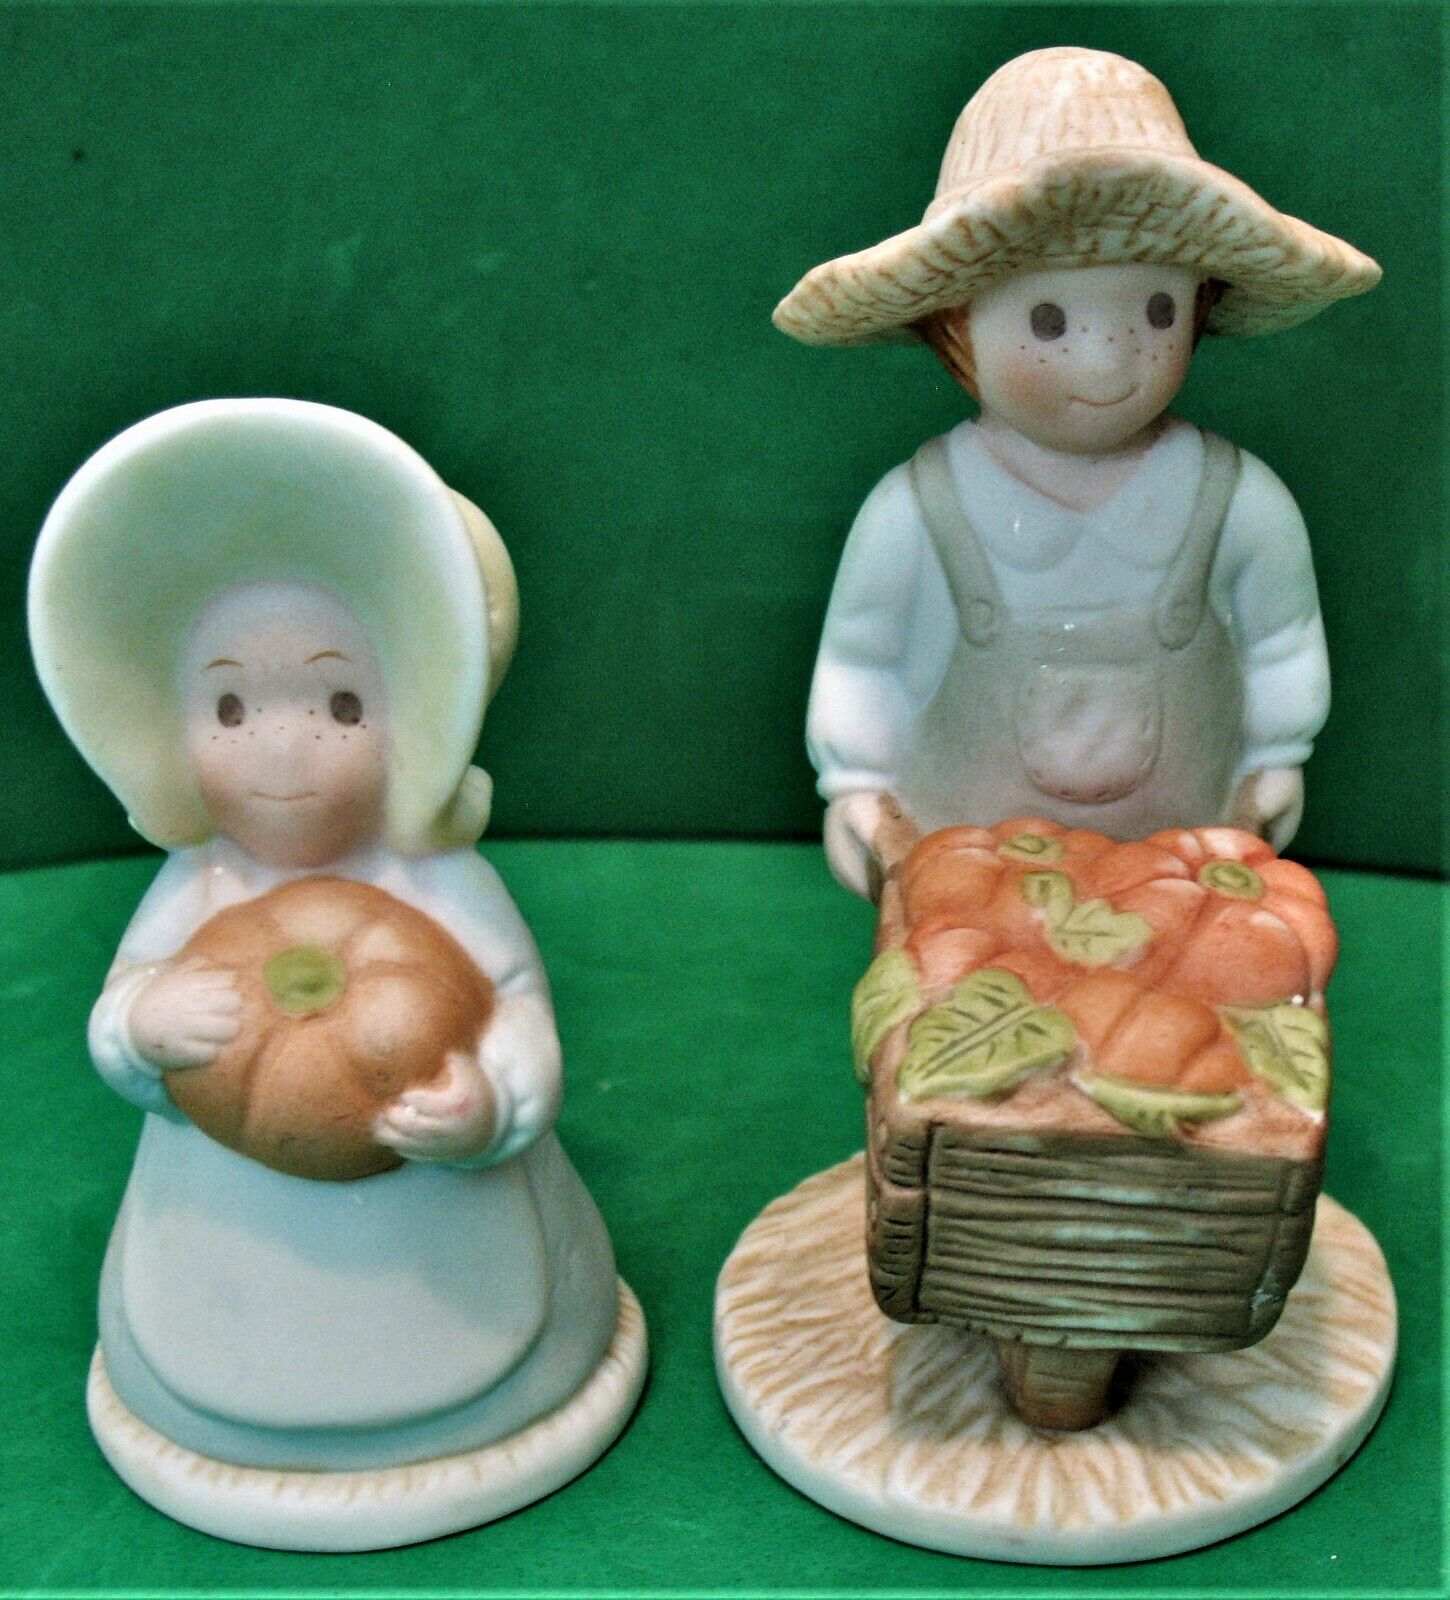 Lot of 2 Bountiful Harvest Circle of Friends by Masterpiece Porcelain Figurines